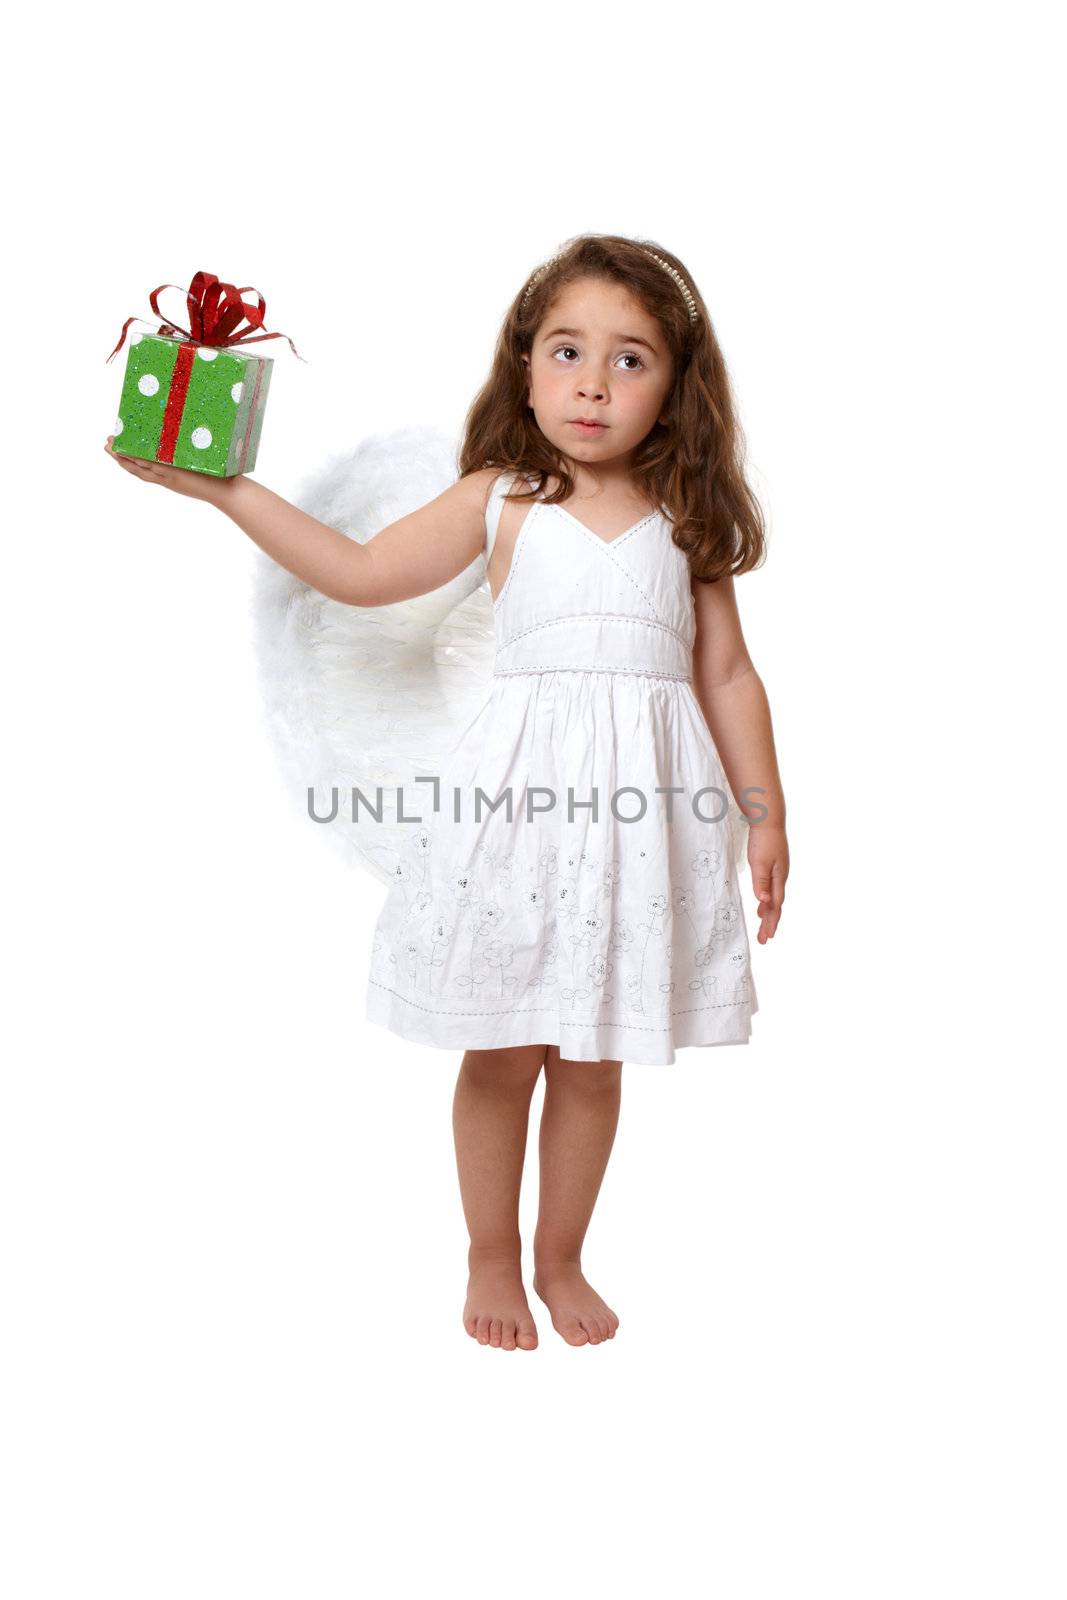 Little girl in feathered angel wings and white dress holds a present or gift